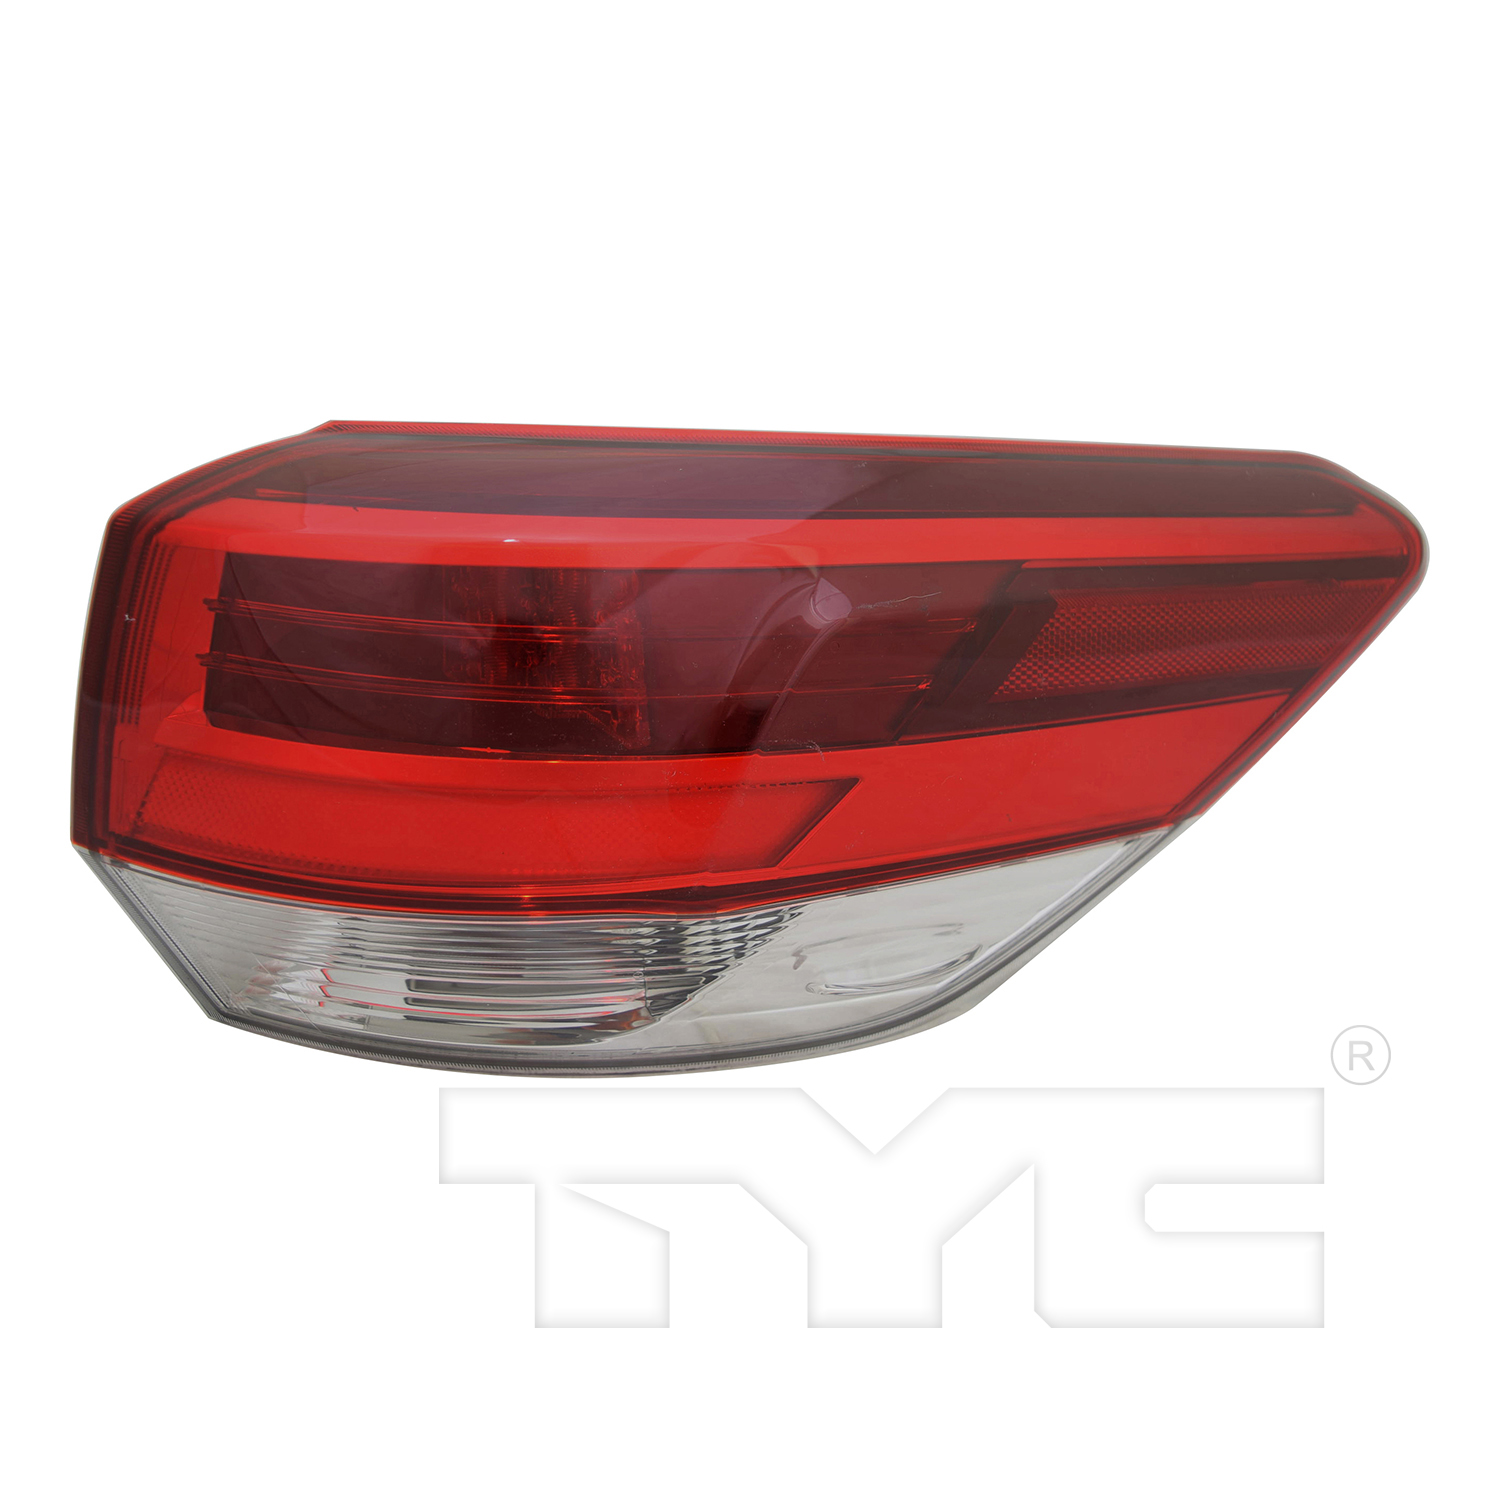 Aftermarket TAILLIGHTS for TOYOTA - HIGHLANDER, HIGHLANDER,18-19,RT Taillamp assy outer